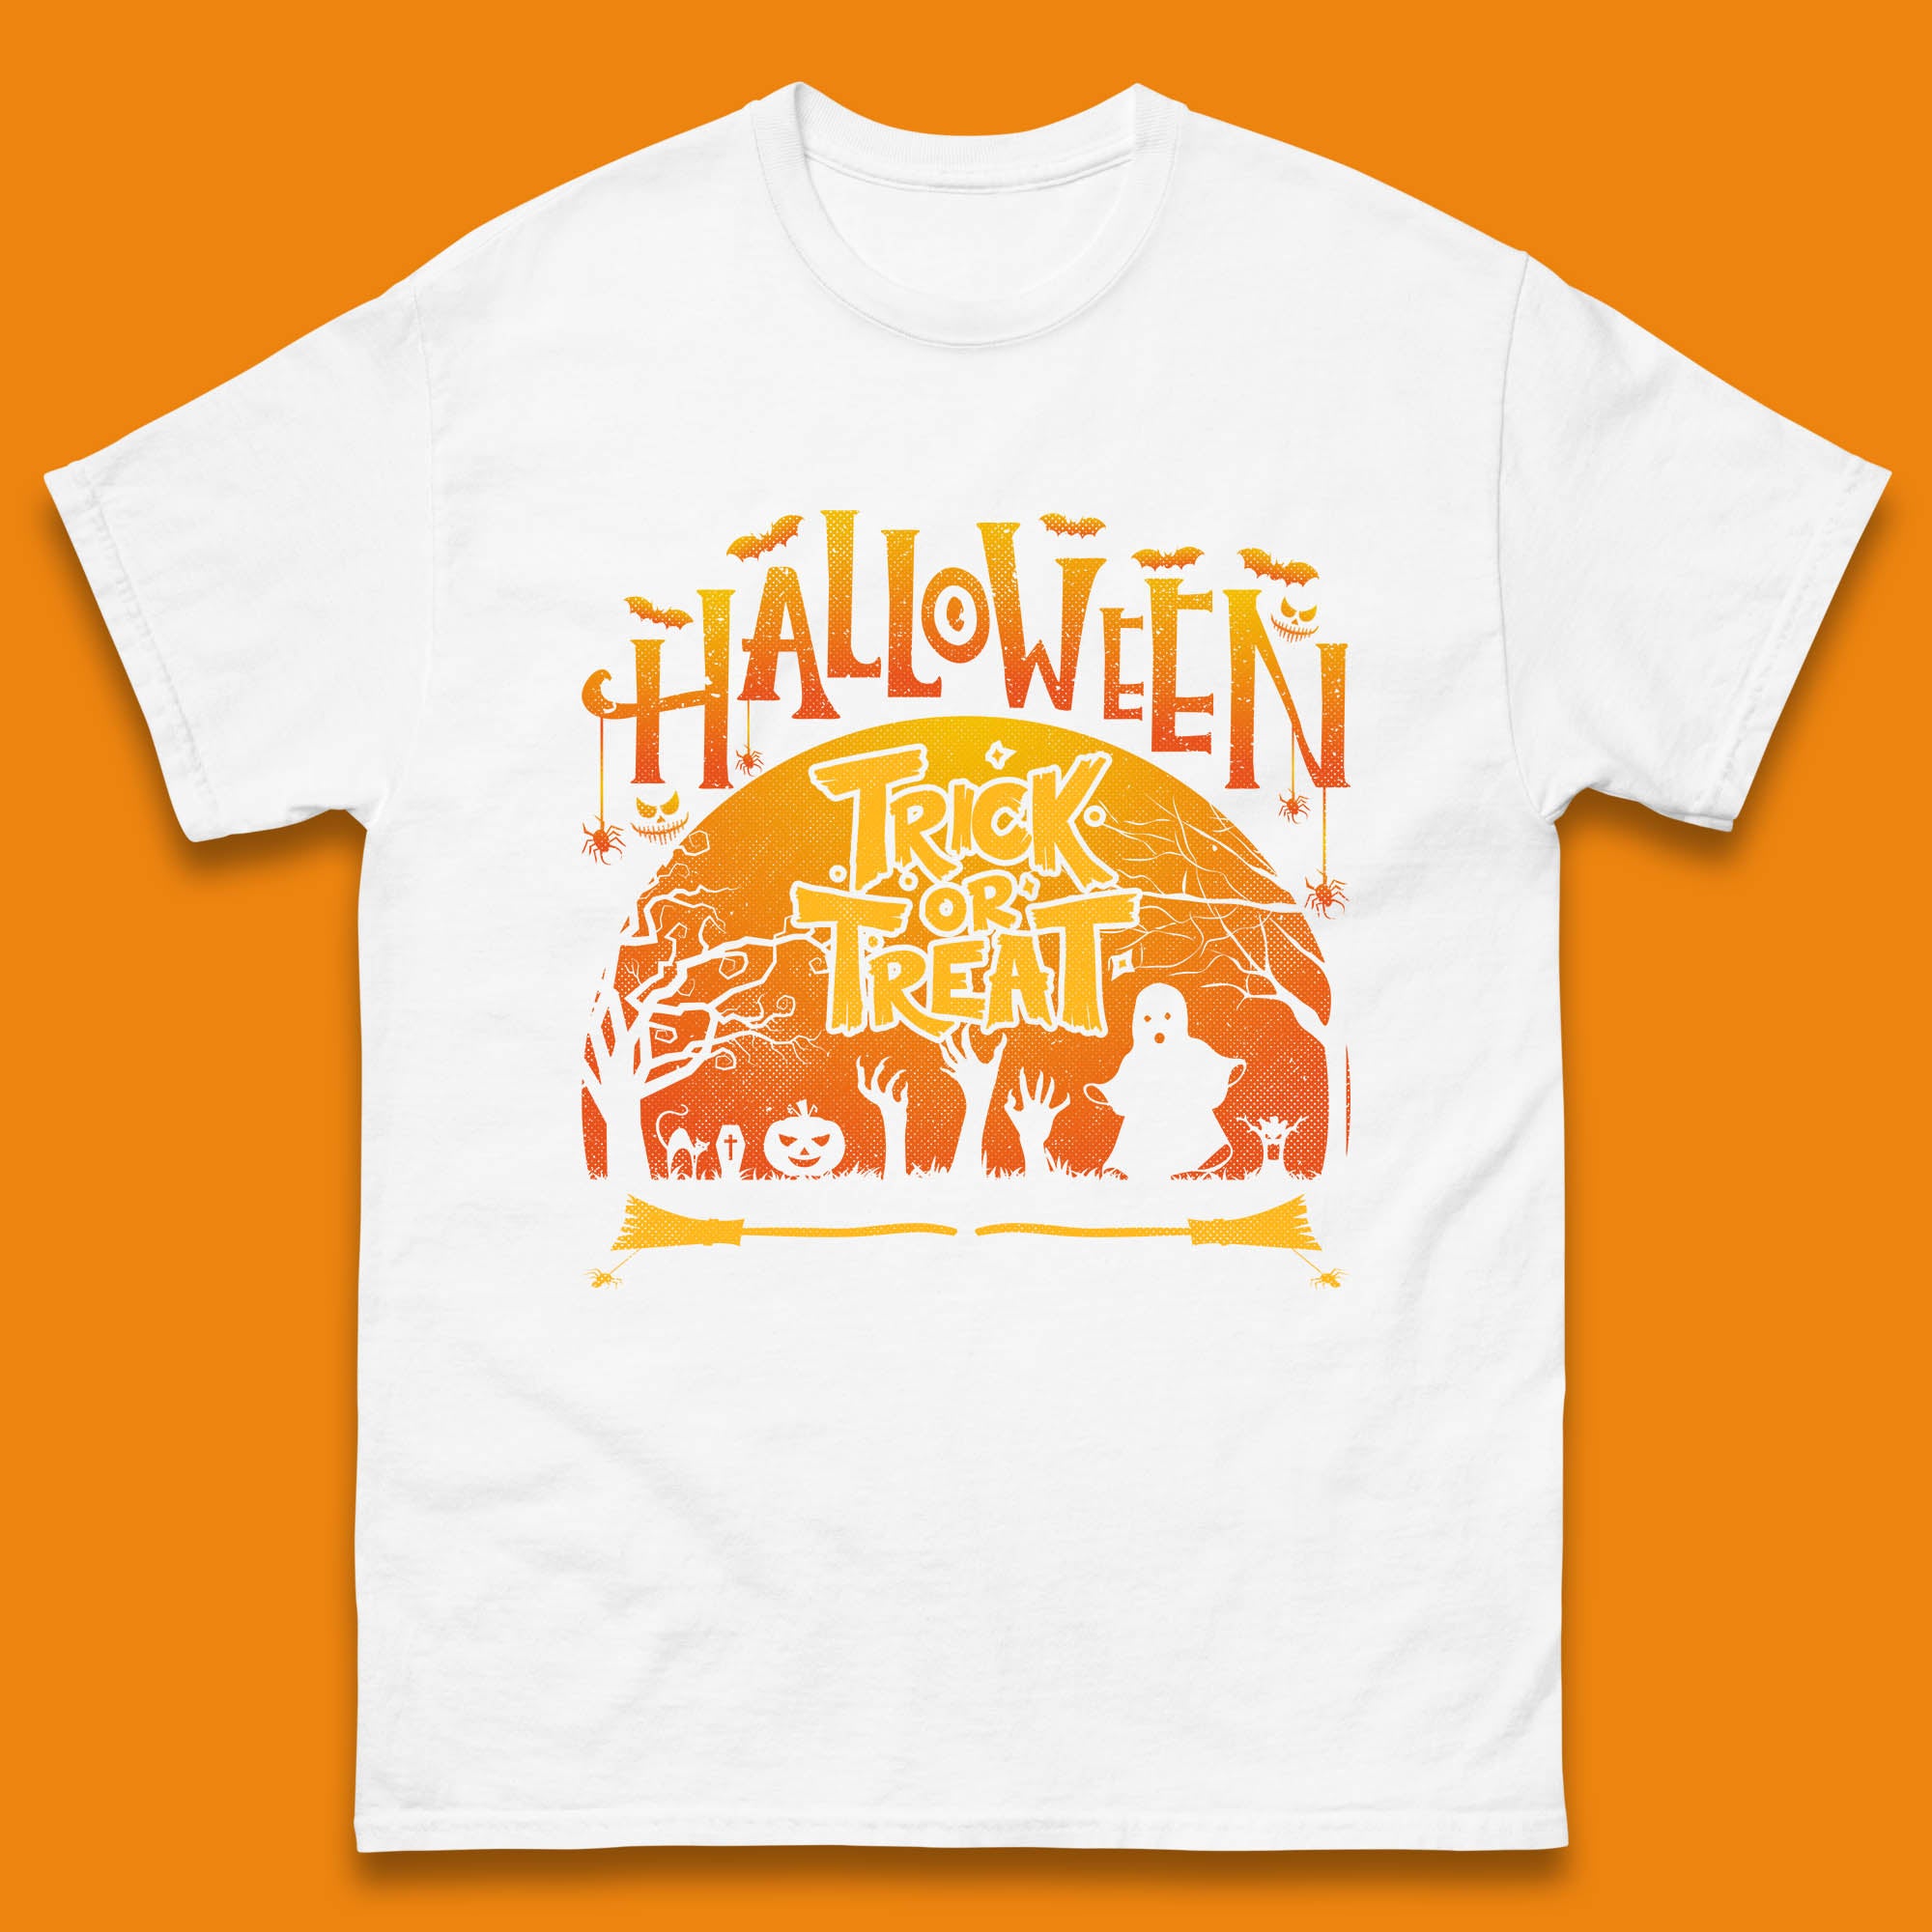 Halloween Trick Or Treat Horror Boo Ghost Creepy Zombie Hands Out Of Graveyard Mens Tee Top